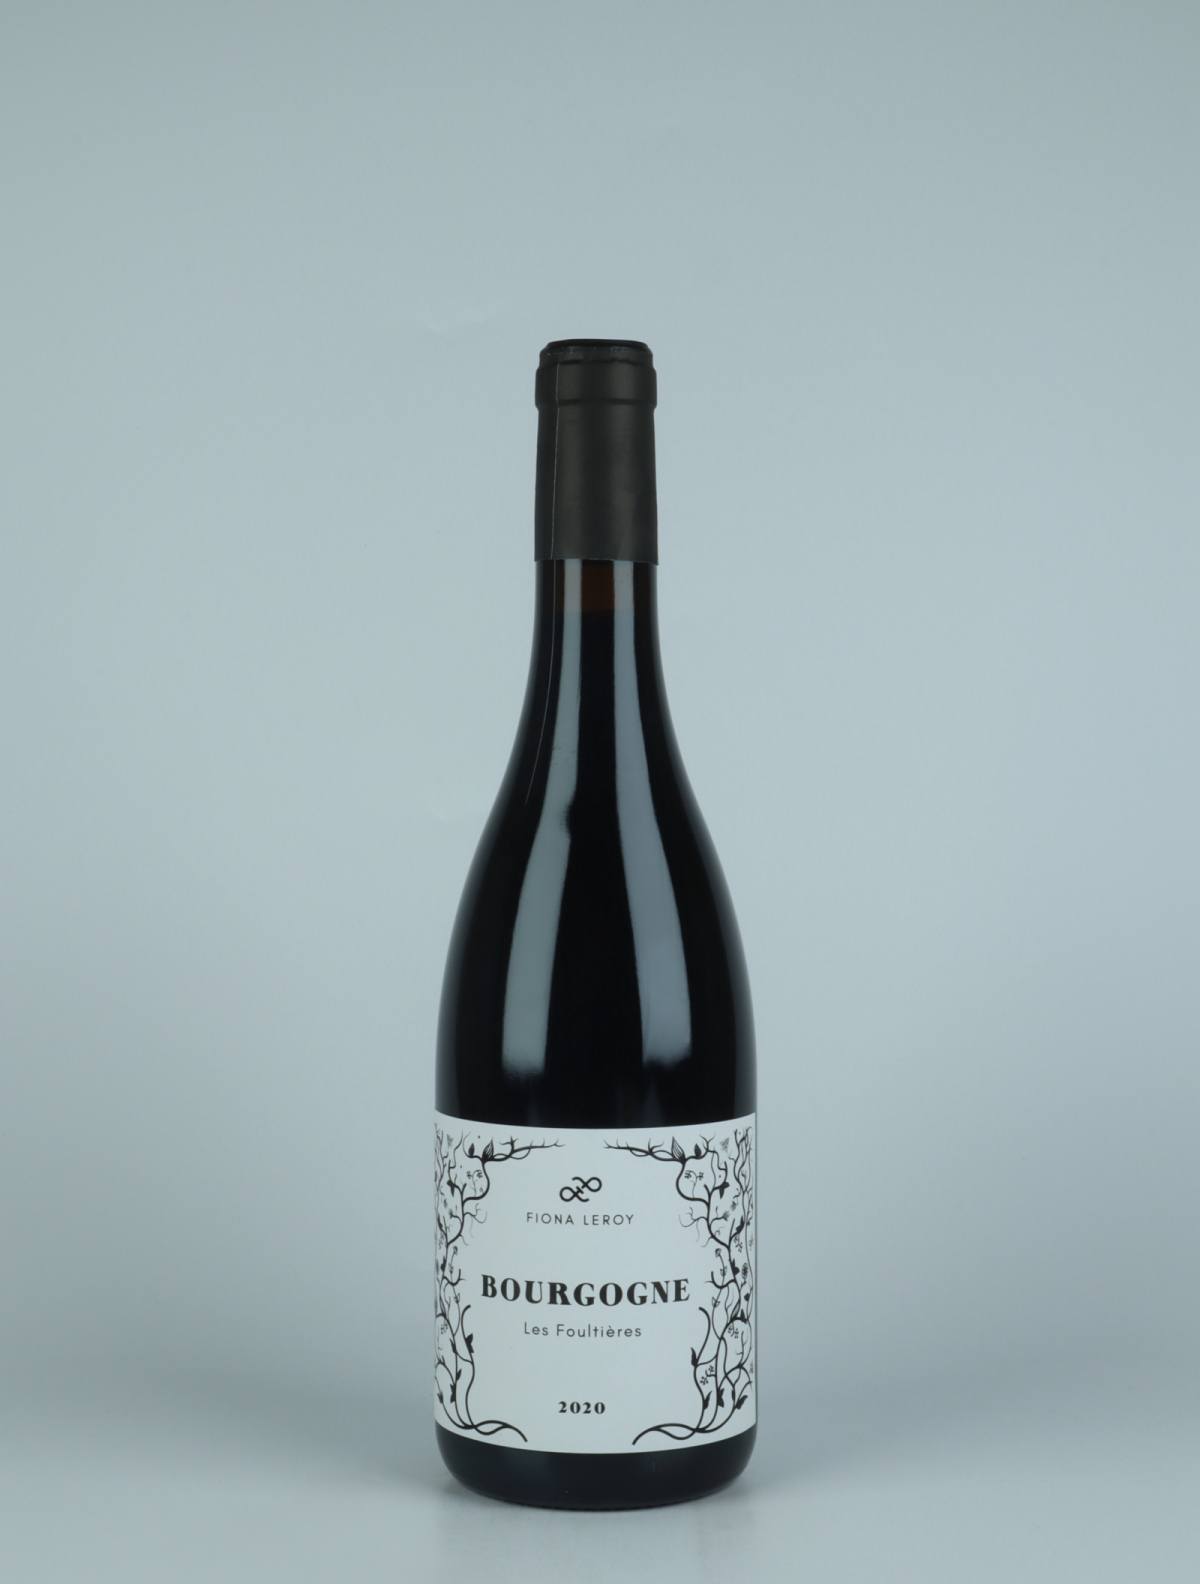 A bottle 2020 Bourgogne Rouge - Les Foultières Red wine from Fiona Leroy, Burgundy in France